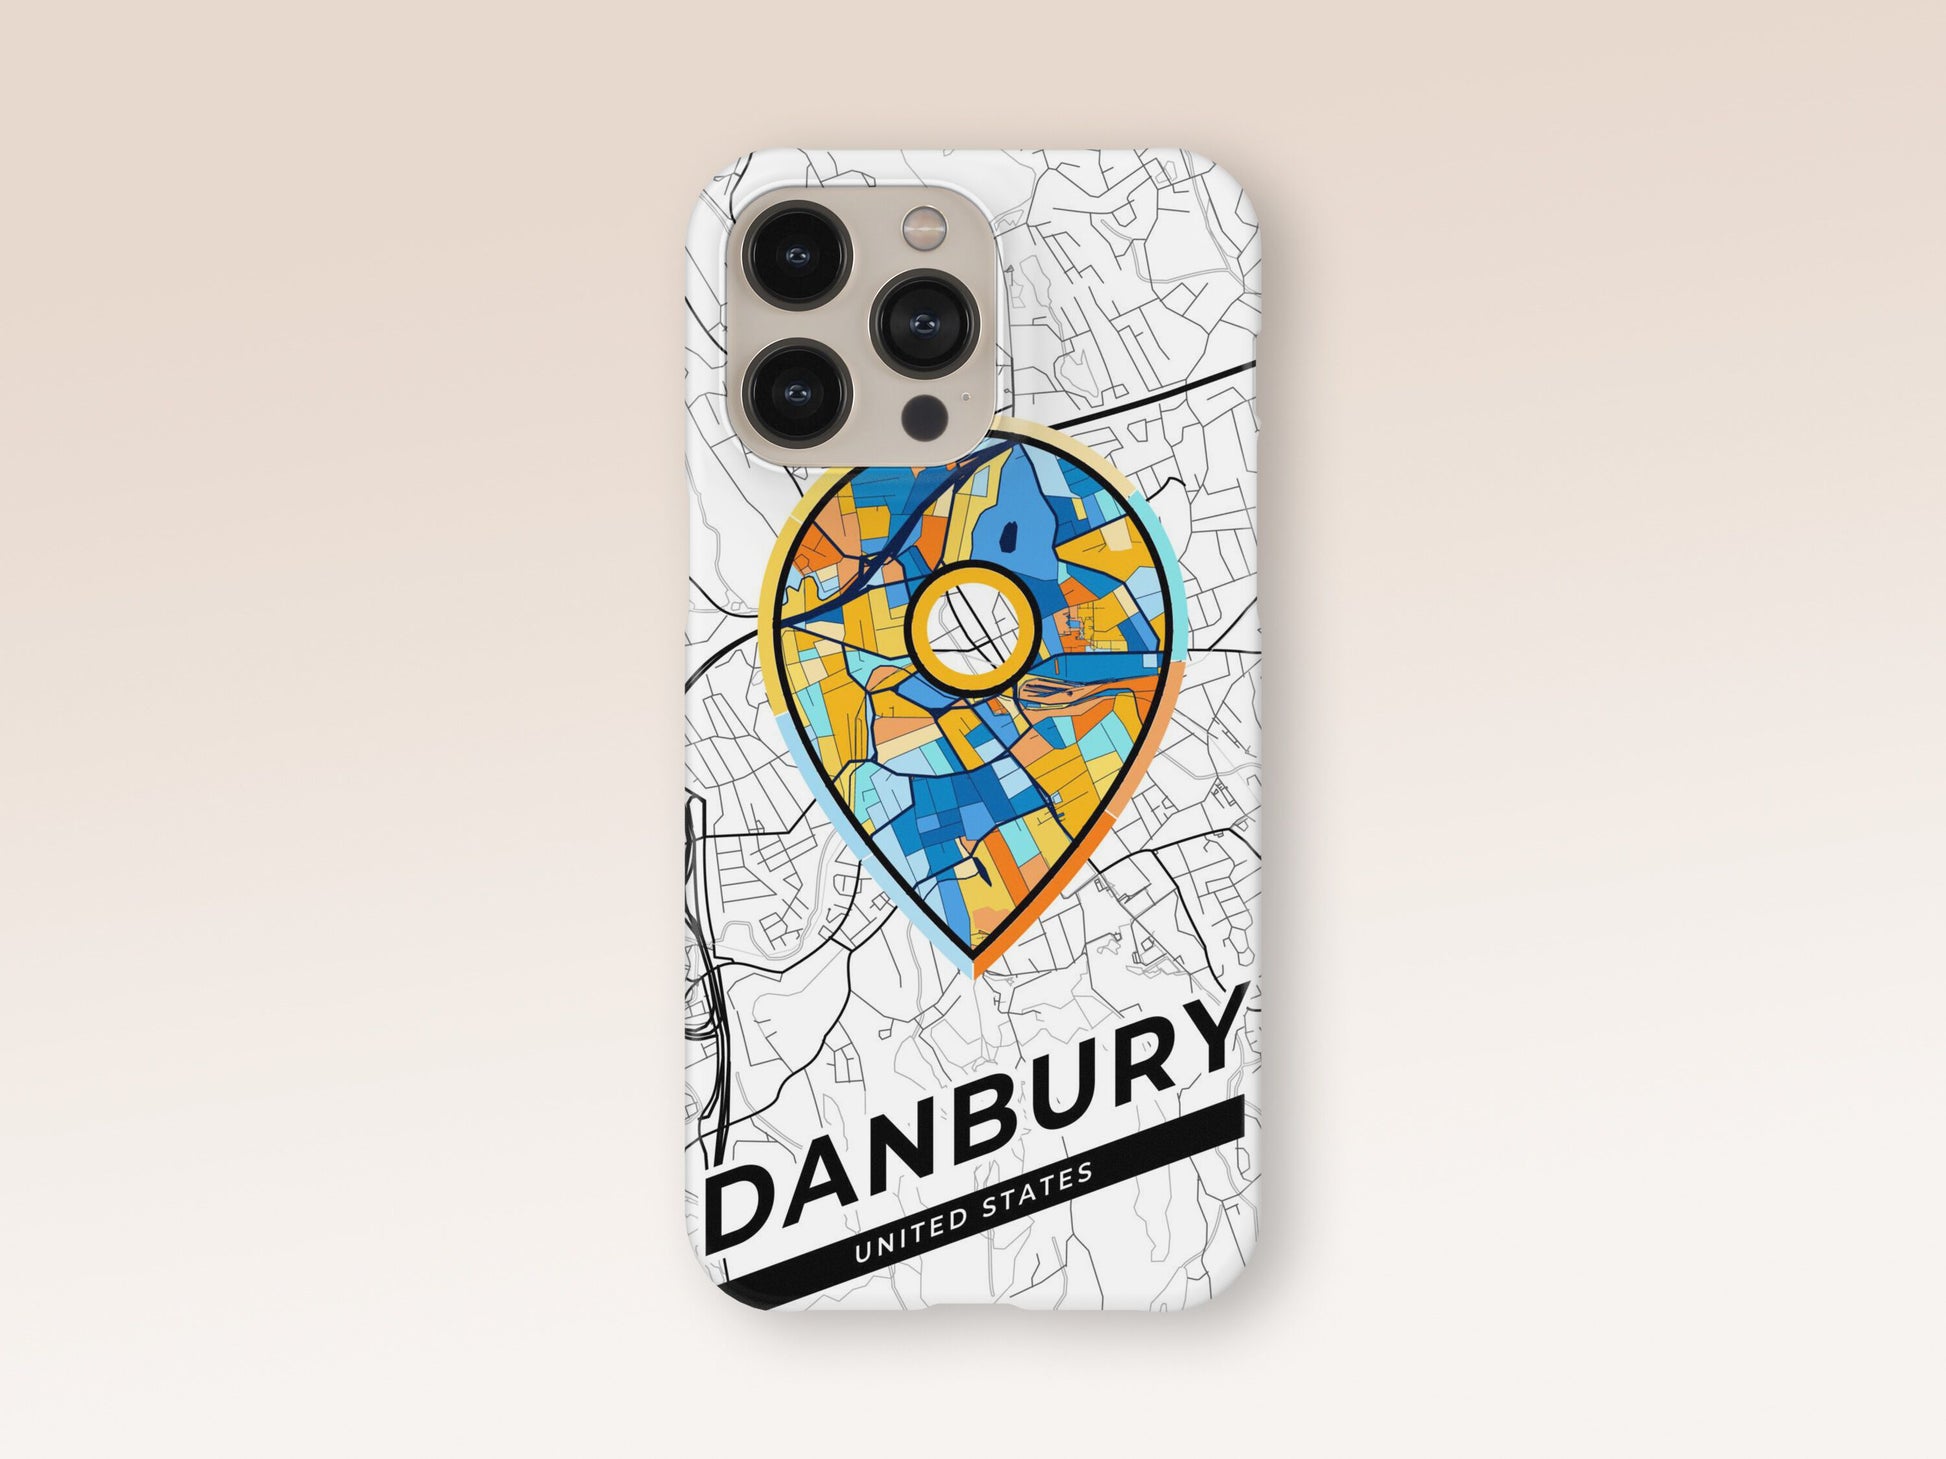 Danbury Connecticut slim phone case with colorful icon. Birthday, wedding or housewarming gift. Couple match cases. 1